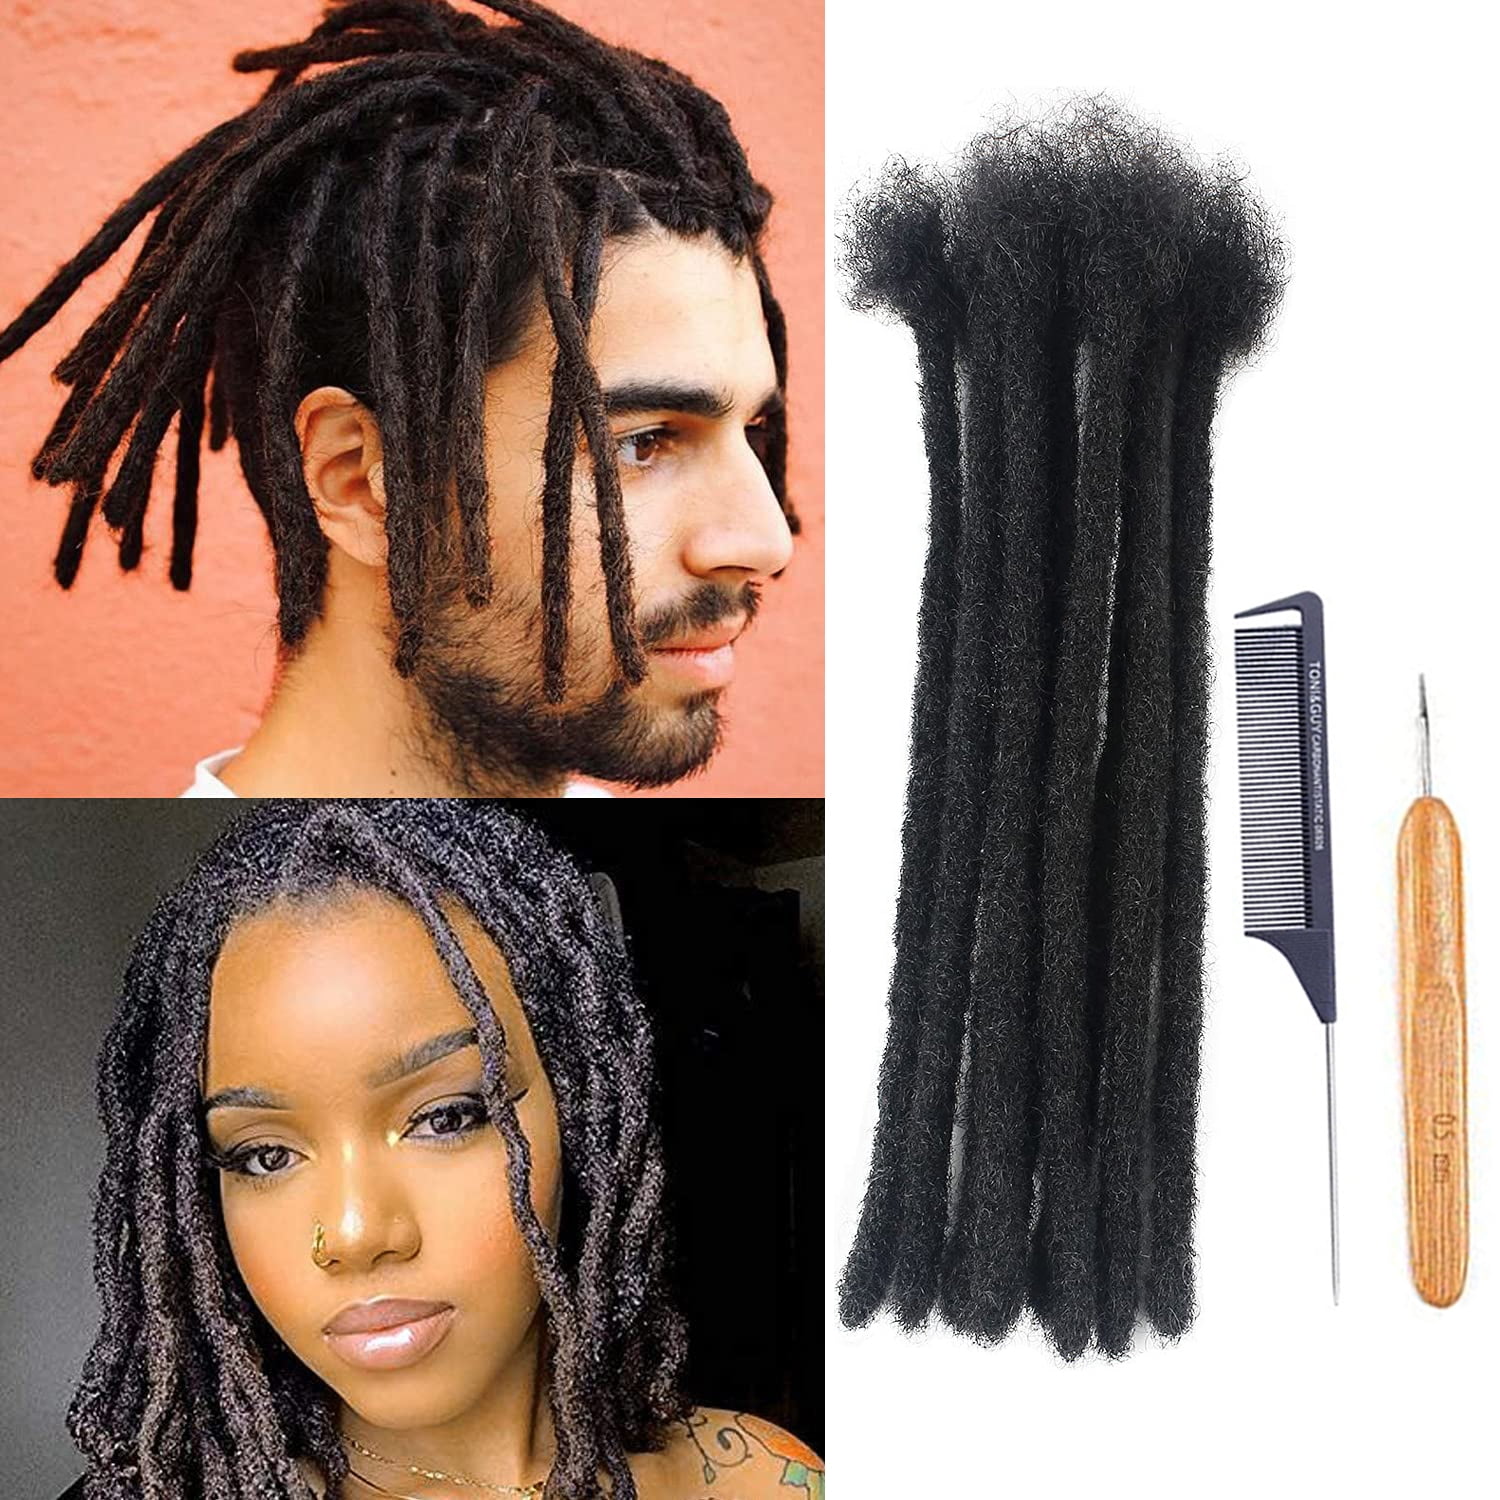 Loc Extensions Human Hair 30 strands, 8 Inch  Width Human Hair  Dreadlock Extensions for Men/Women Full Handmade Permanent Dread Extensions  Can Be Dyed and Bleached(,8 inch,1B) 